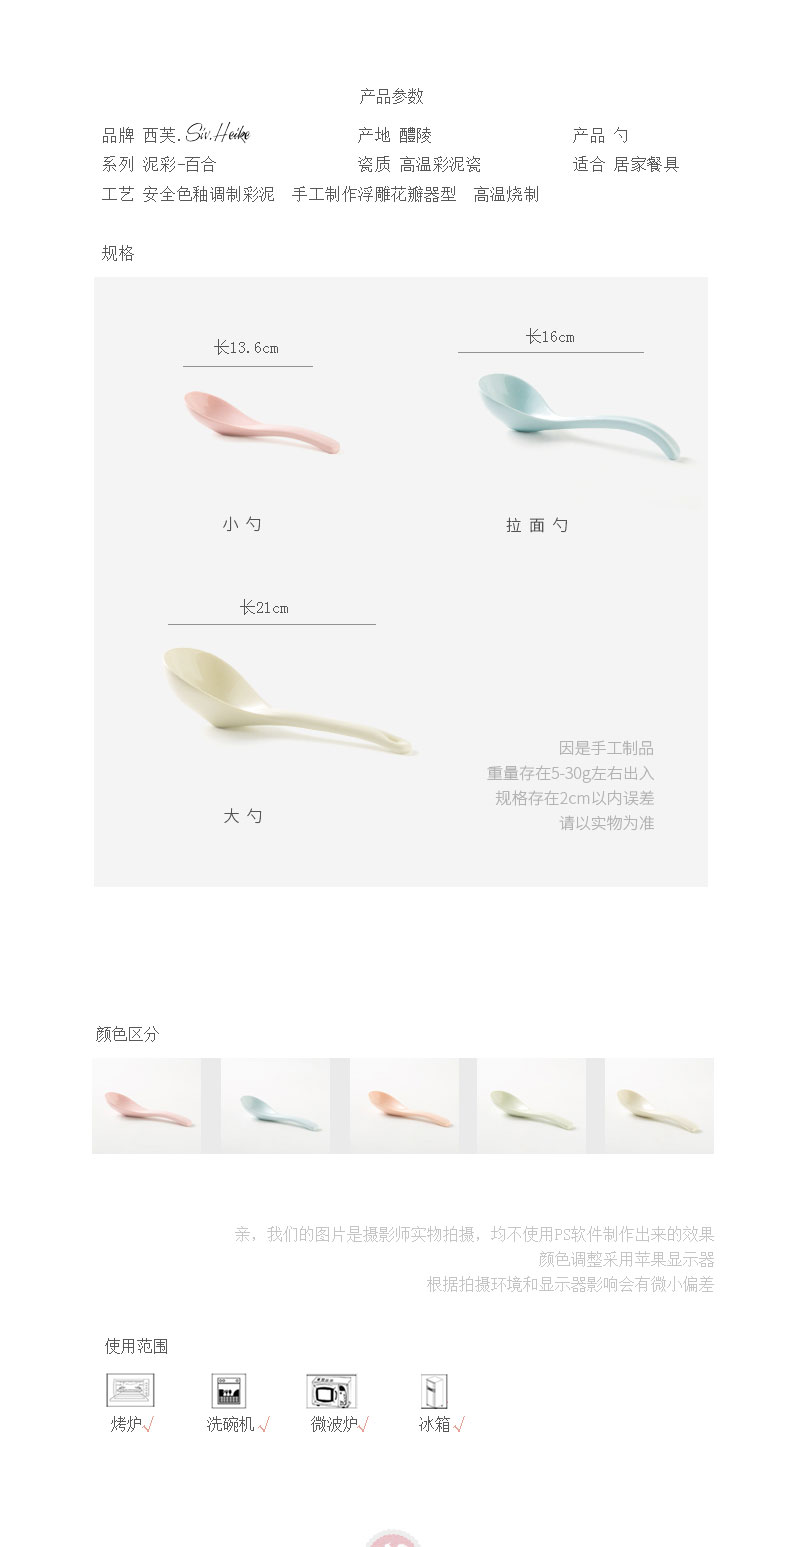 Color household contracted Japanese Korean creative couples long handle ceramic spoon tablespoon small spoon, soup spoon, tableware